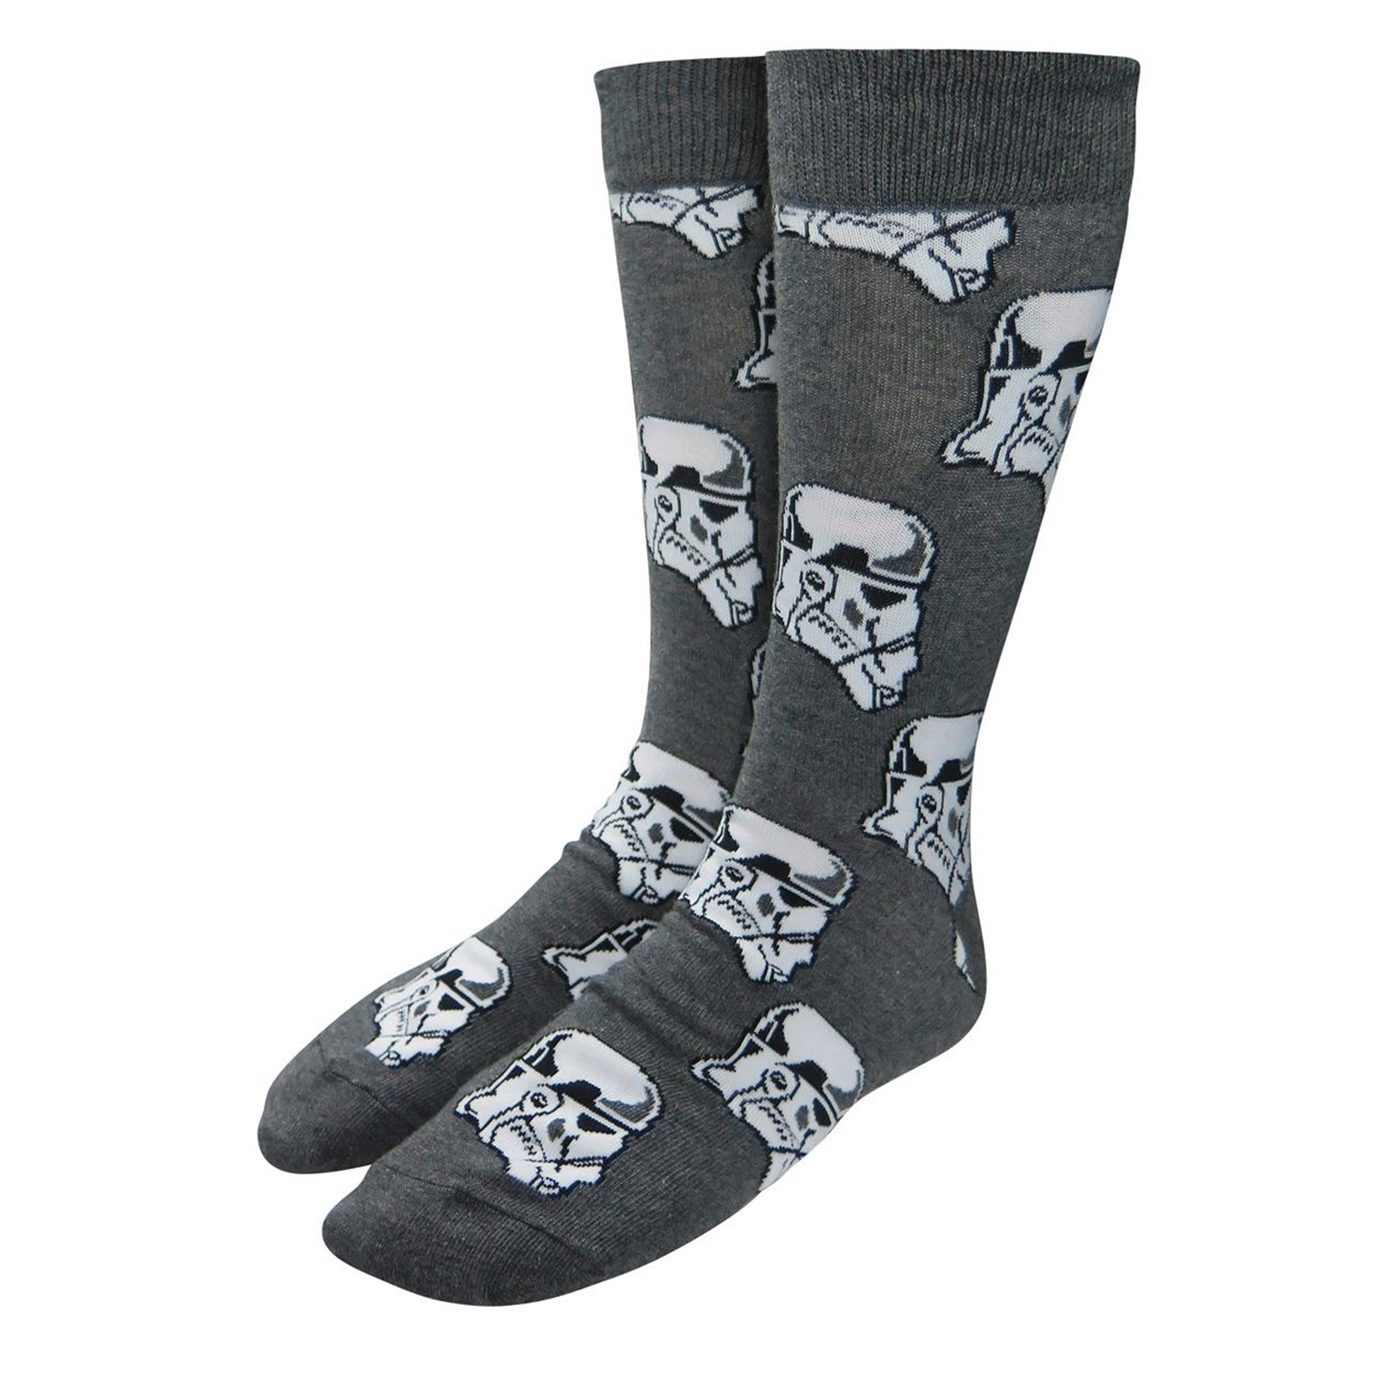 Star Wars Stormtroopers All-Over Crew Socks